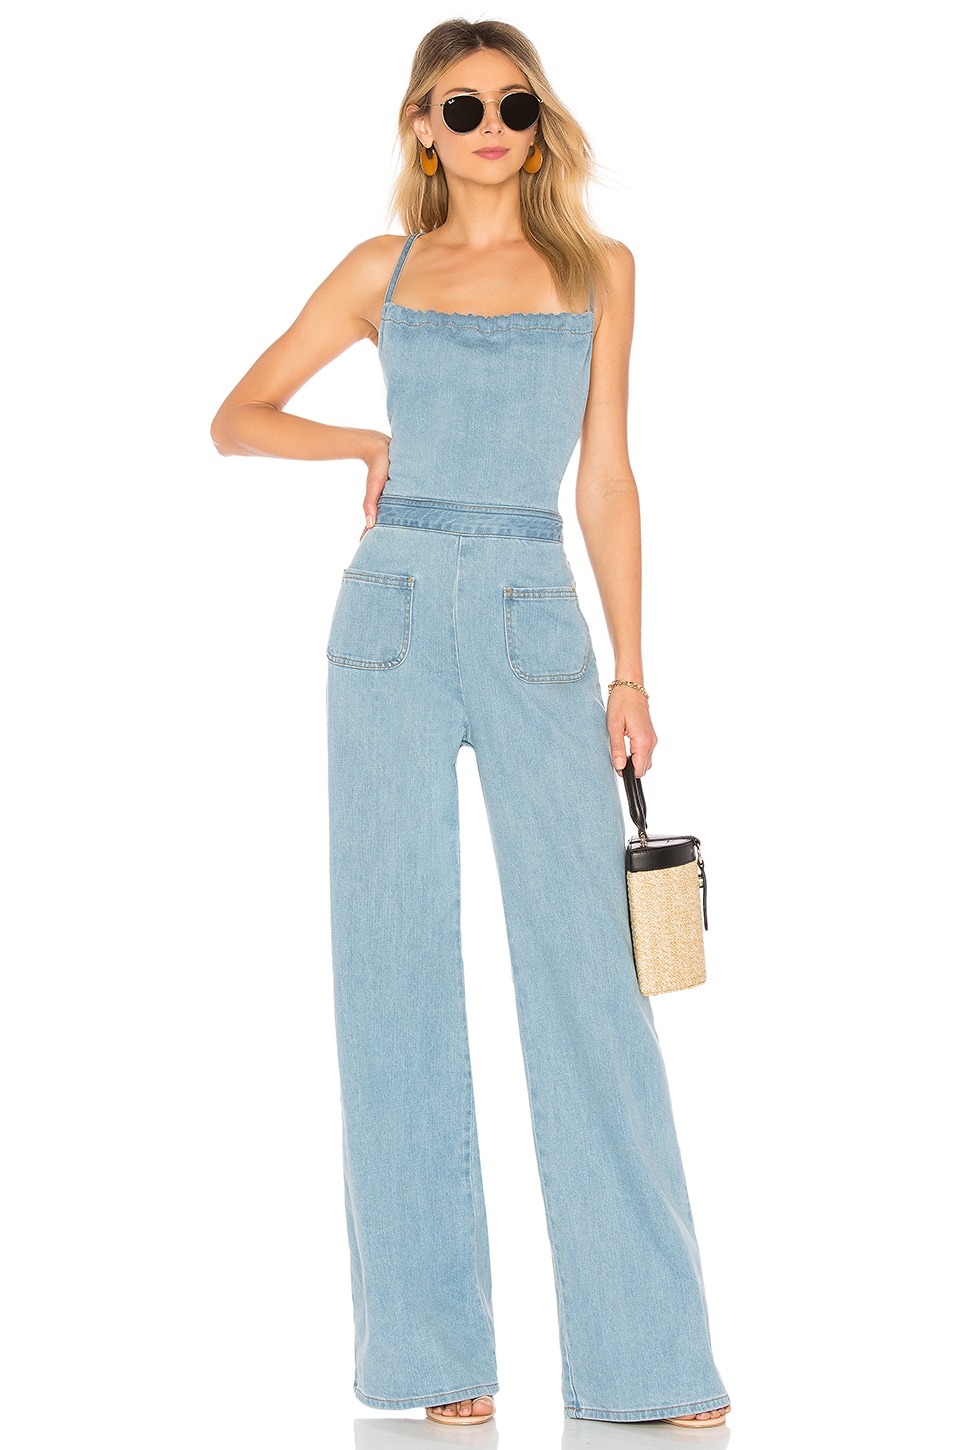 STONED IMMACULATE STONED IMMACULATE JEAN GENIE JUMPSUIT IN BLUE.,STNI-WC1